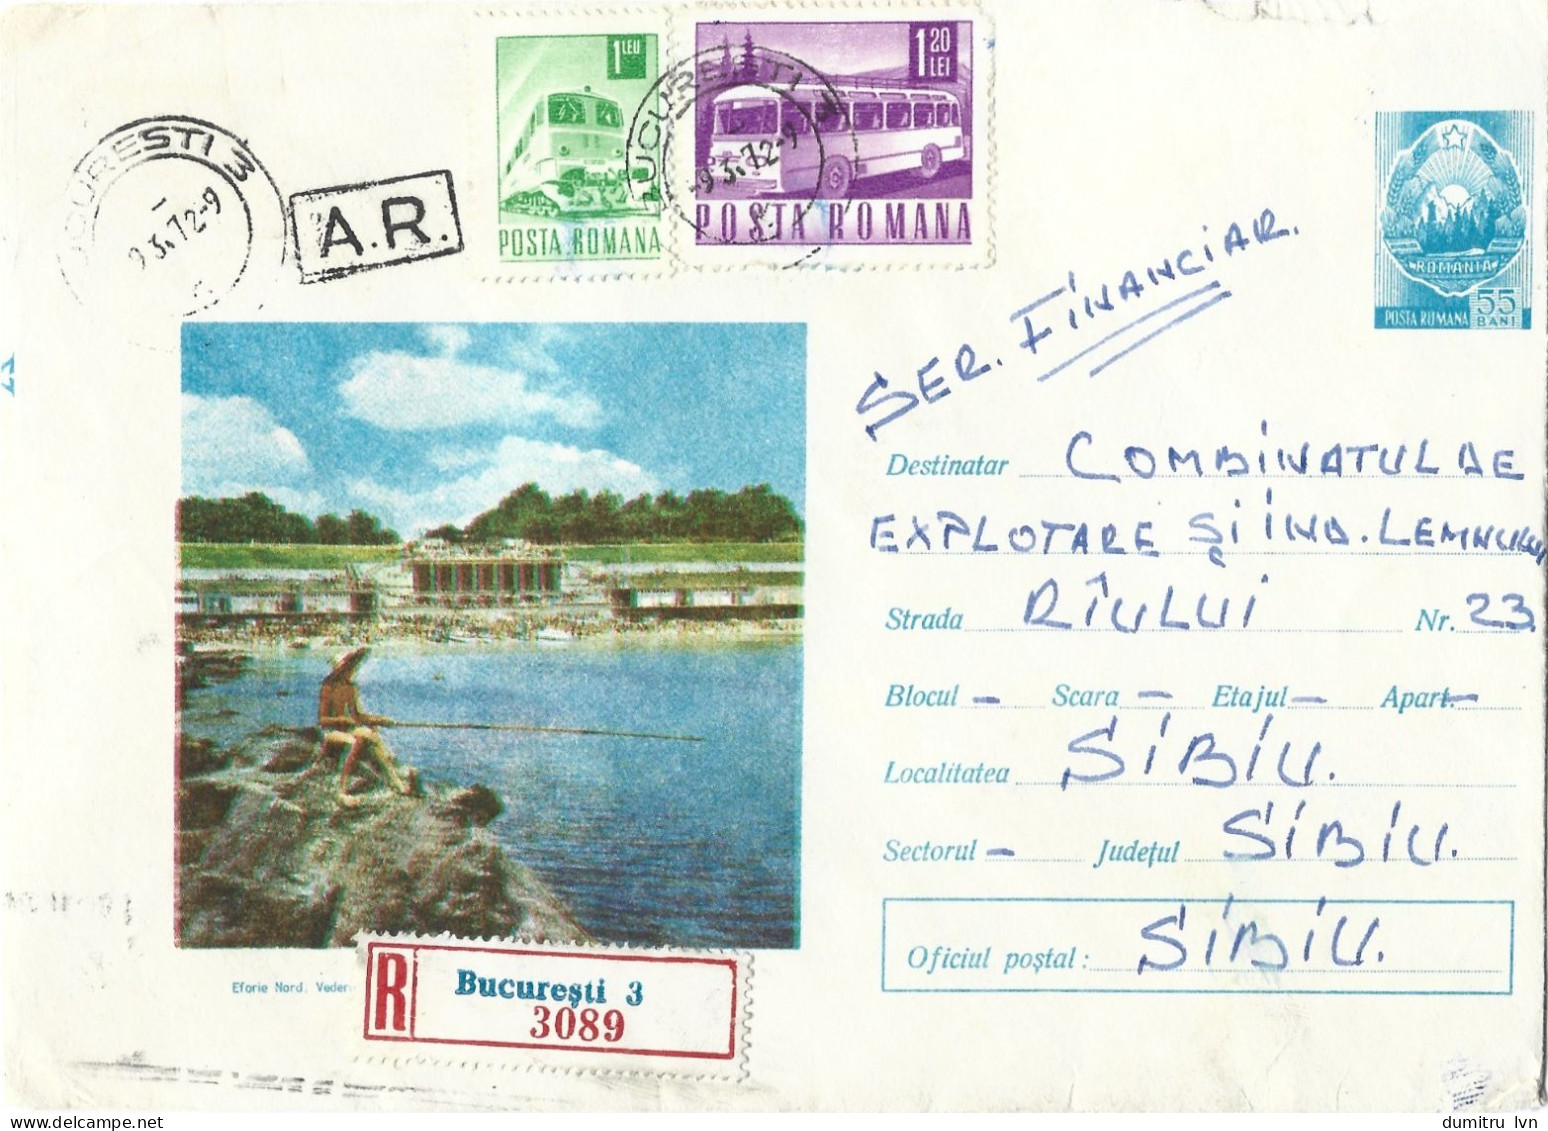 ROMANIA 1972 EFORIE NORD VIEW, PEOPLE FISHING, SEASIDE, BUILDING, BEACH, CIRCULATED ENVELOPE, COVER STATIONERY - Entiers Postaux